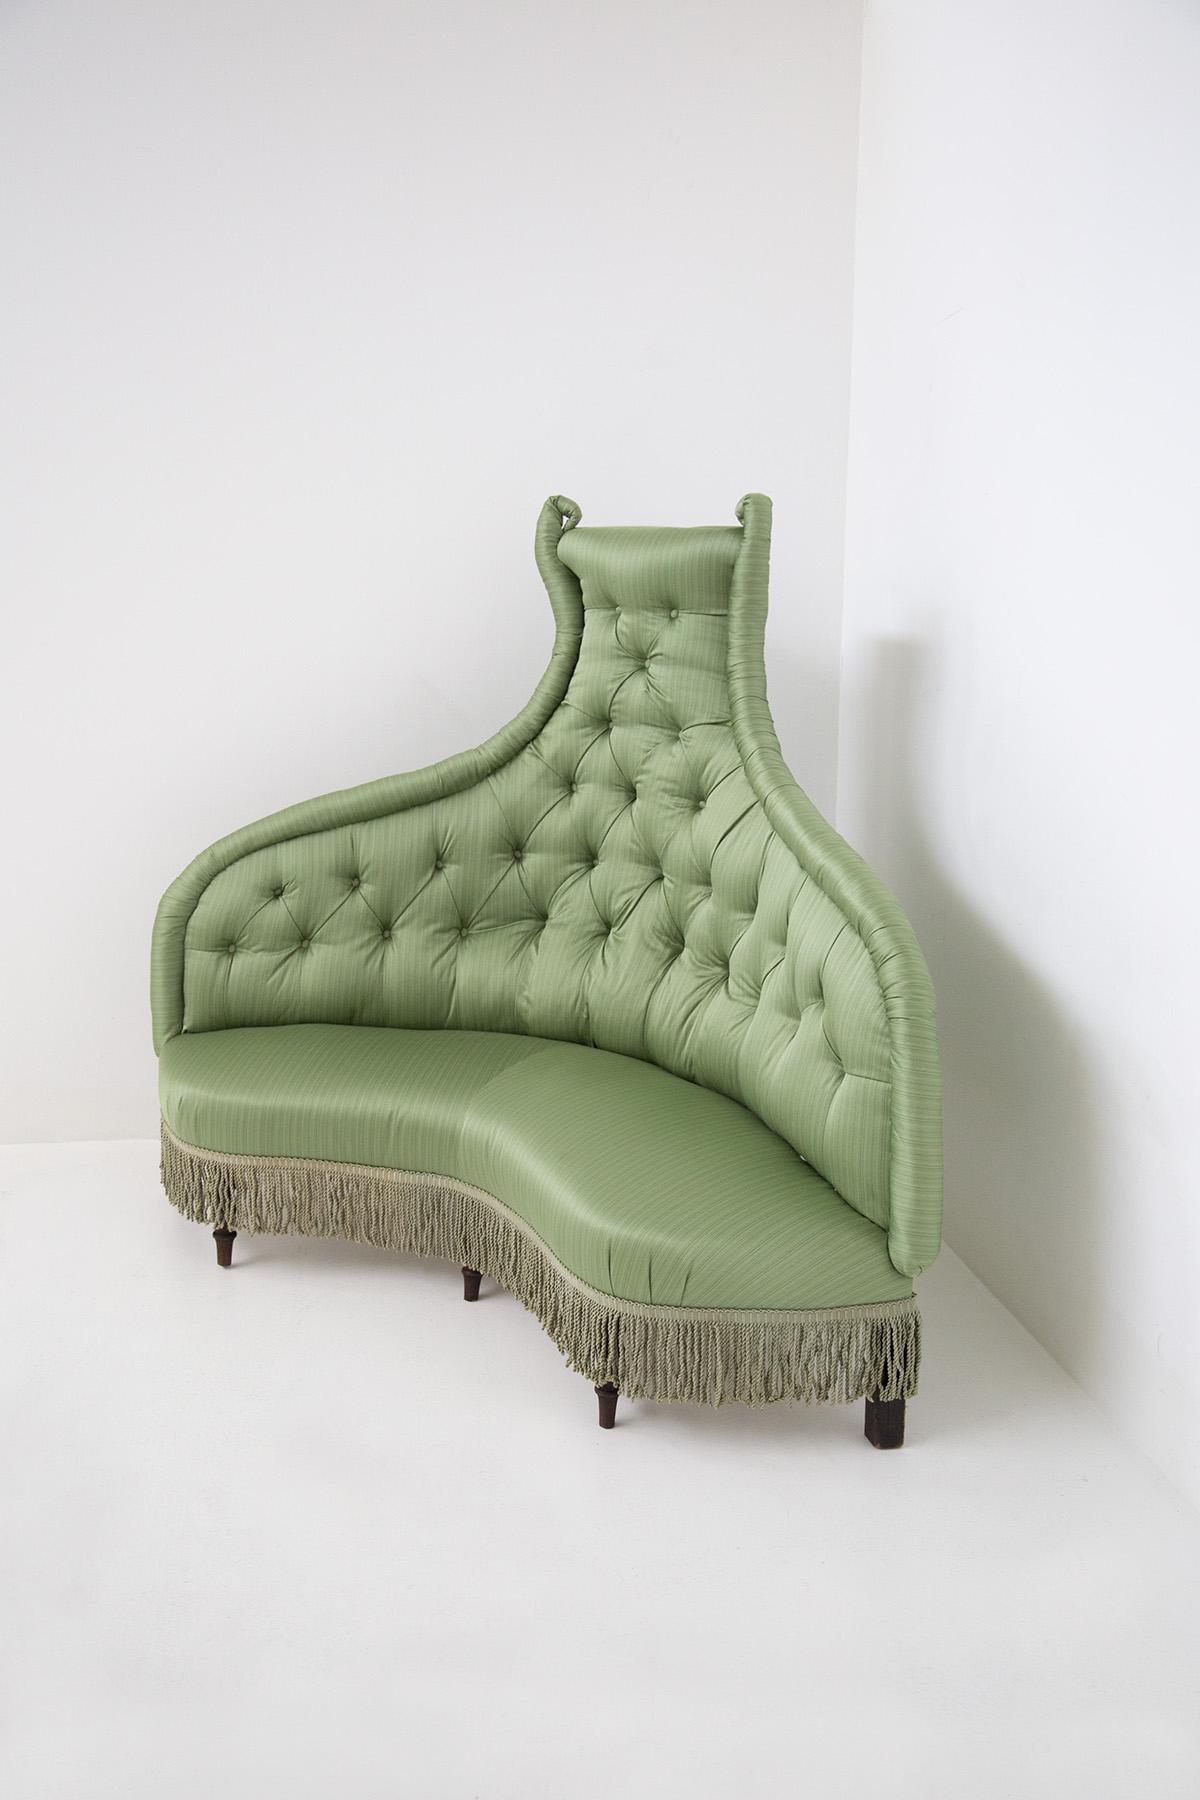 Italian Vintage Luxury Sofa in Wood and Green Silk Satin For Sale 2